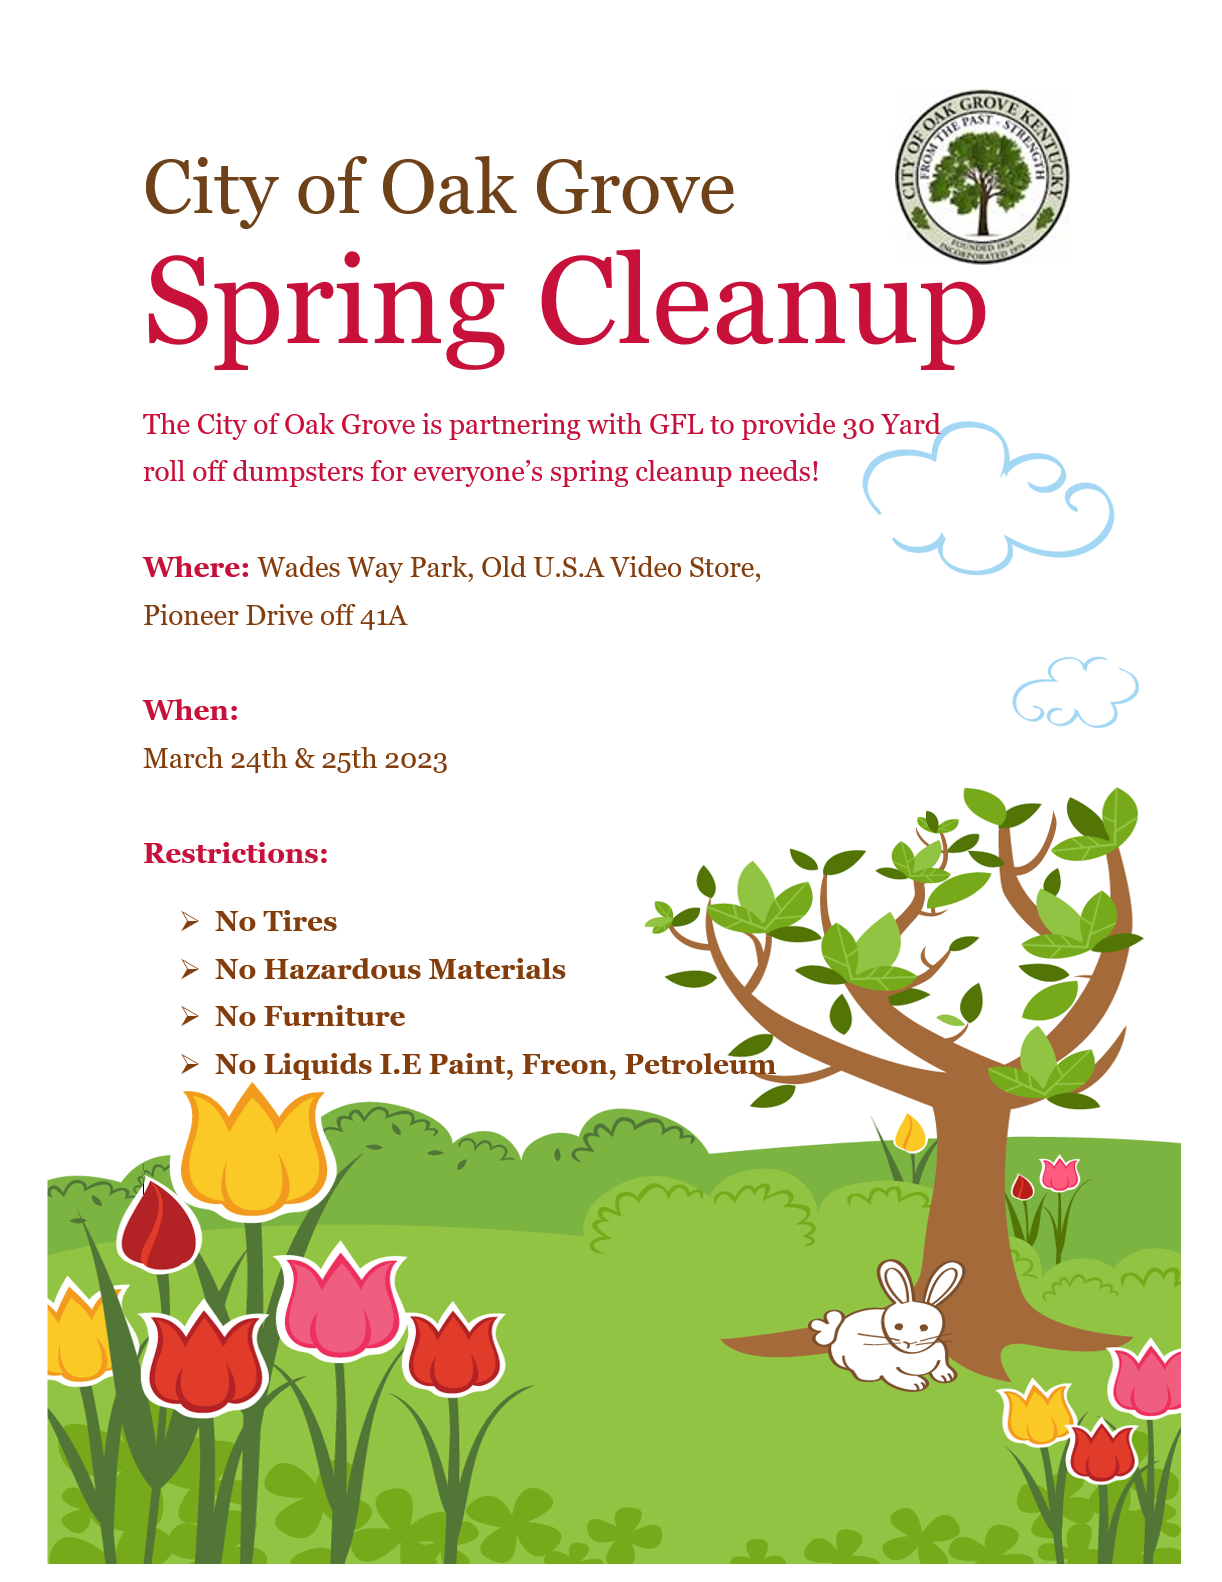 Featured image for “City of Oak Grove Spring Cleanup”